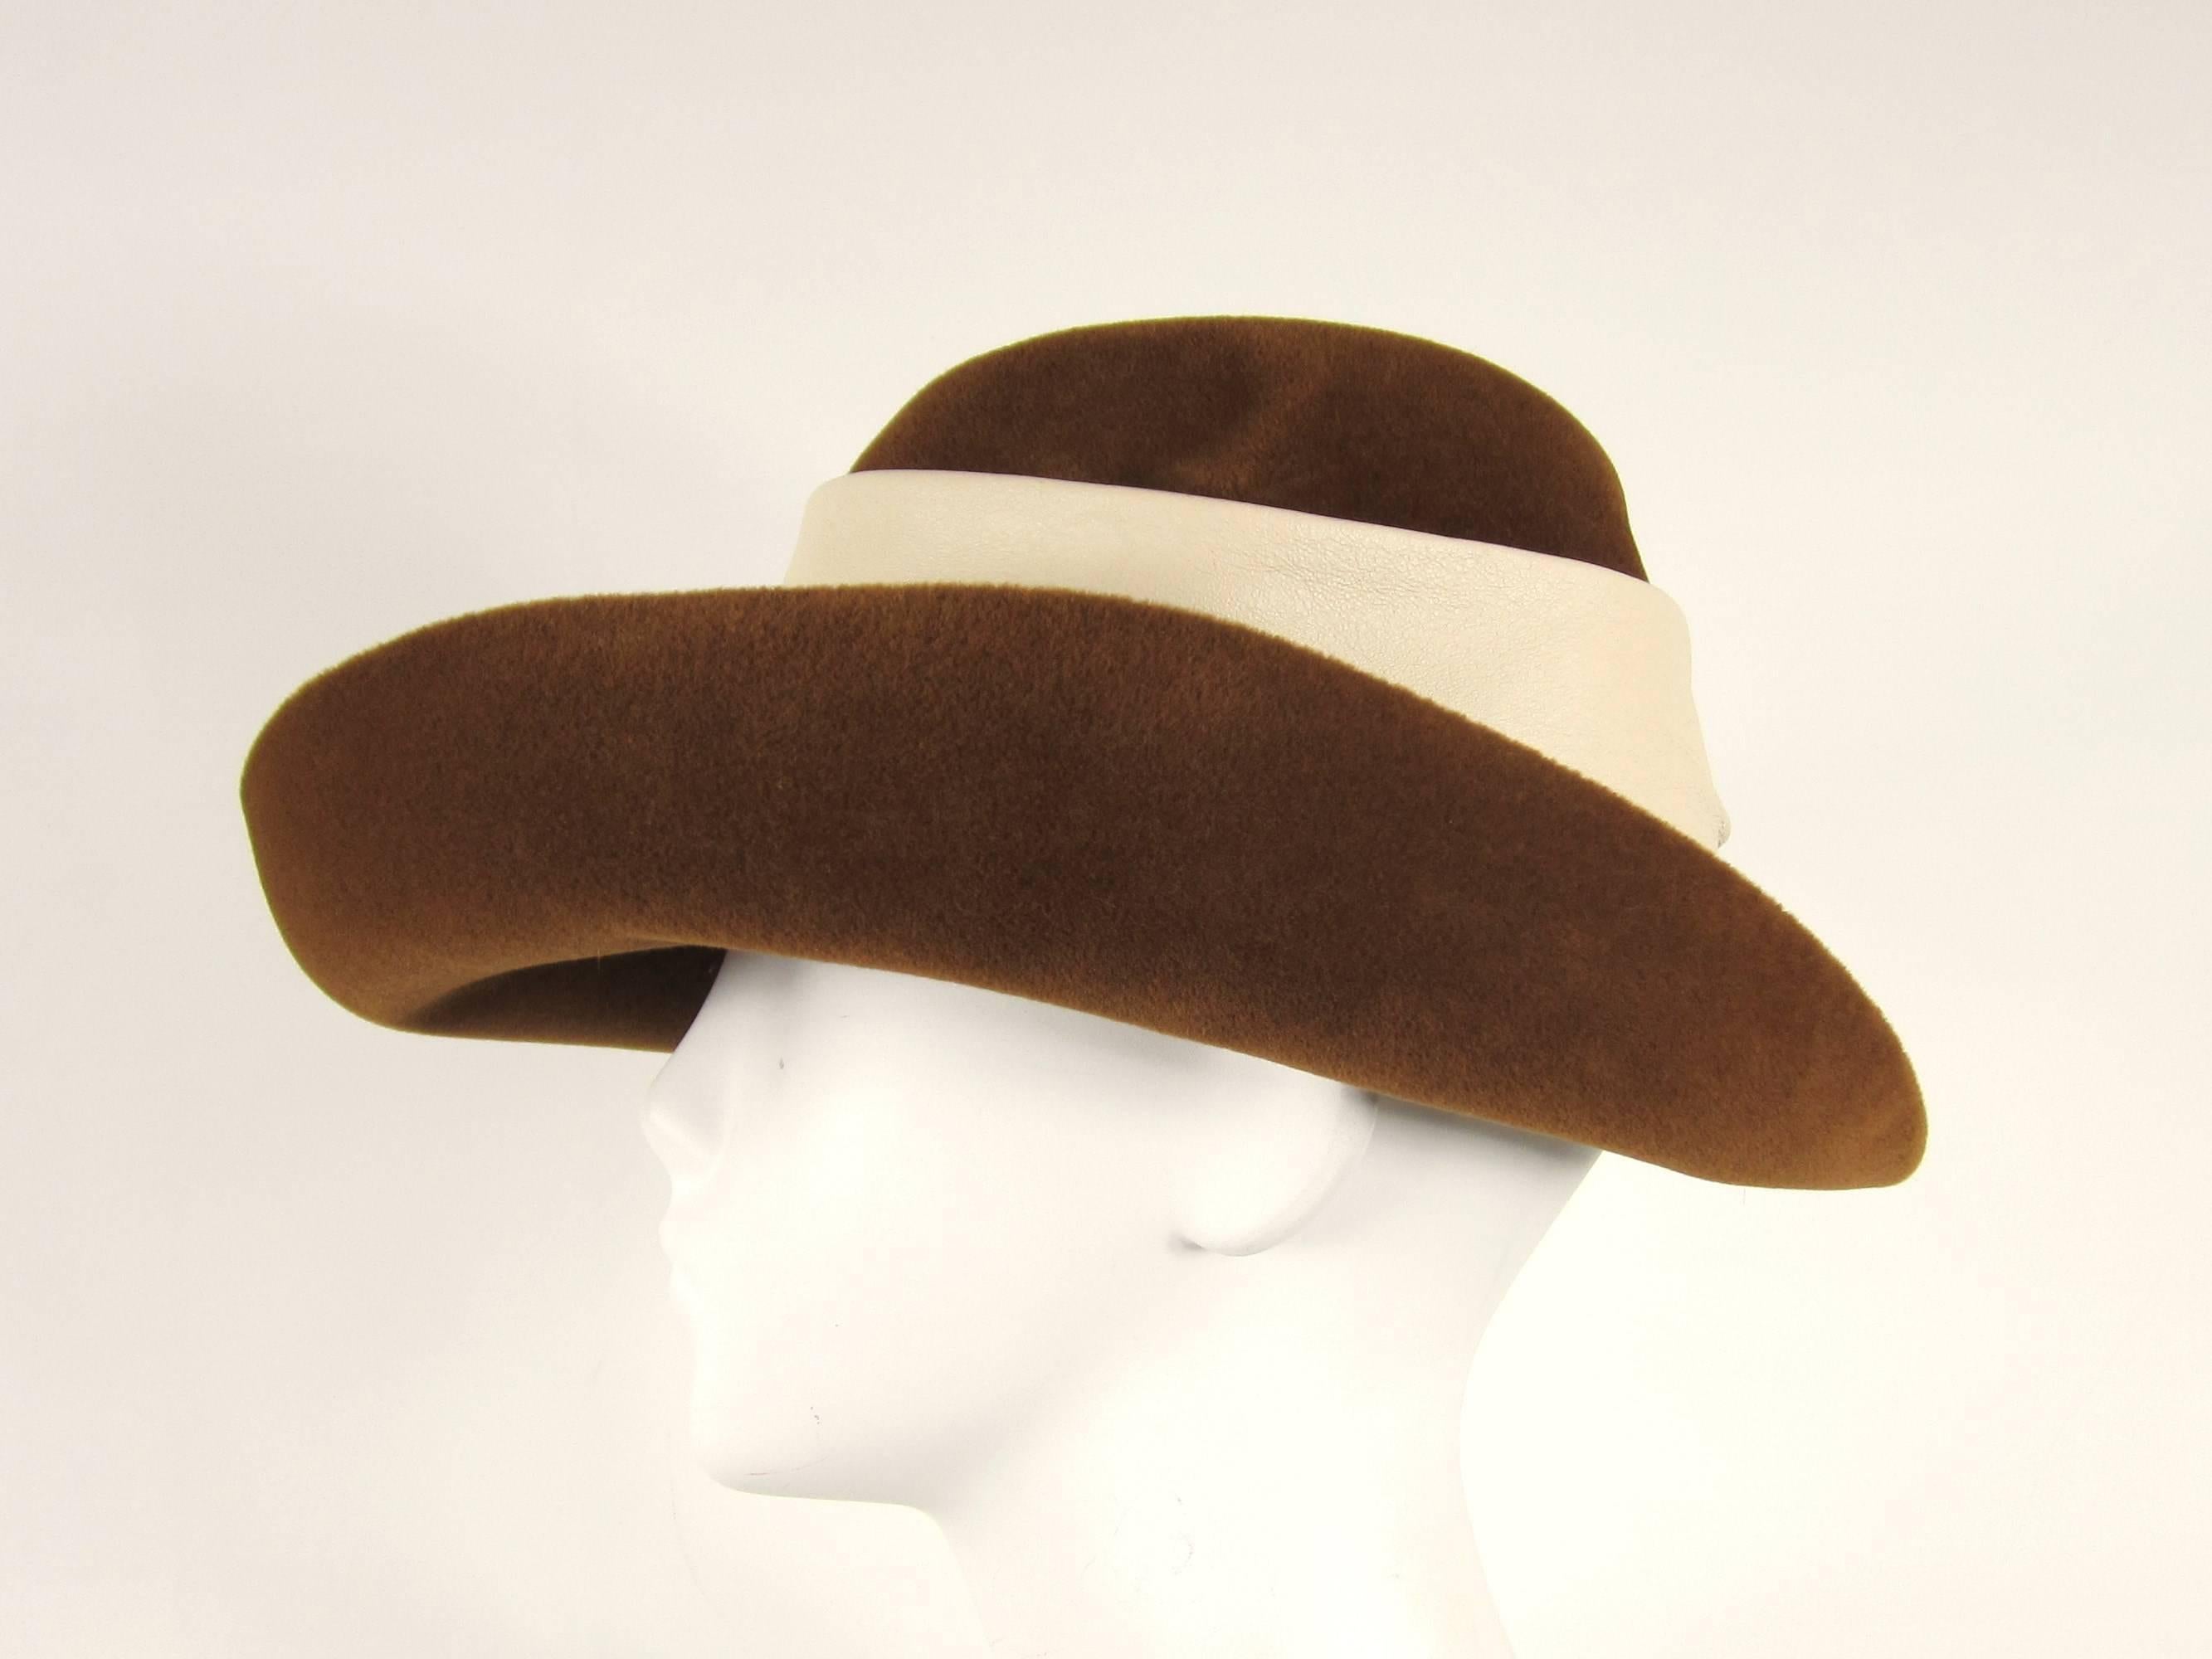 Stunning wide brim hat with large Bow at the side. Measuring 23.5 inches around inside of hat. Approx. 7-3/8. Brim is 4.25 in at the widest 
Please check our storefront for hundreds of items including New, Never worn vintage Jewelry as well as more